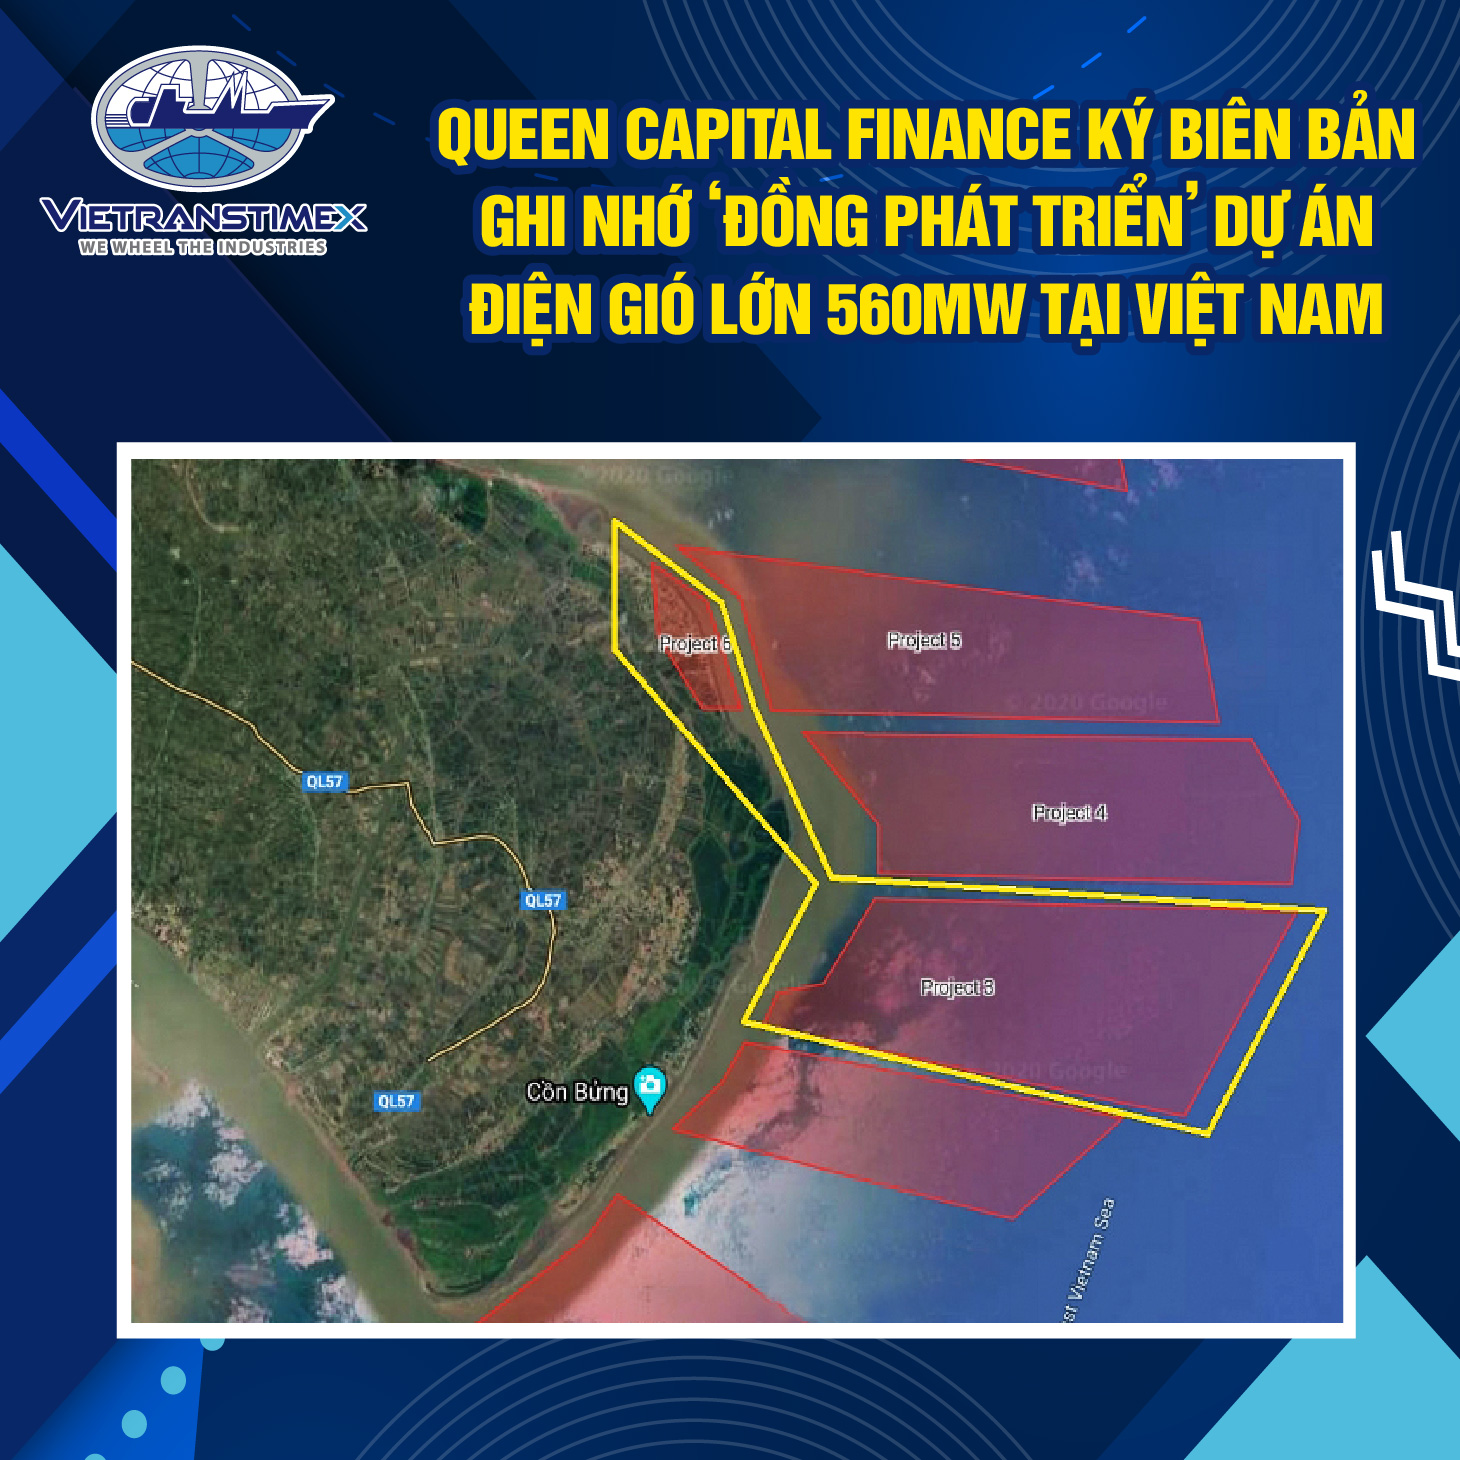 Queen Capital Finance Signed Mou To Jointly Develop 560MW Of Wind Farms In Vietnam